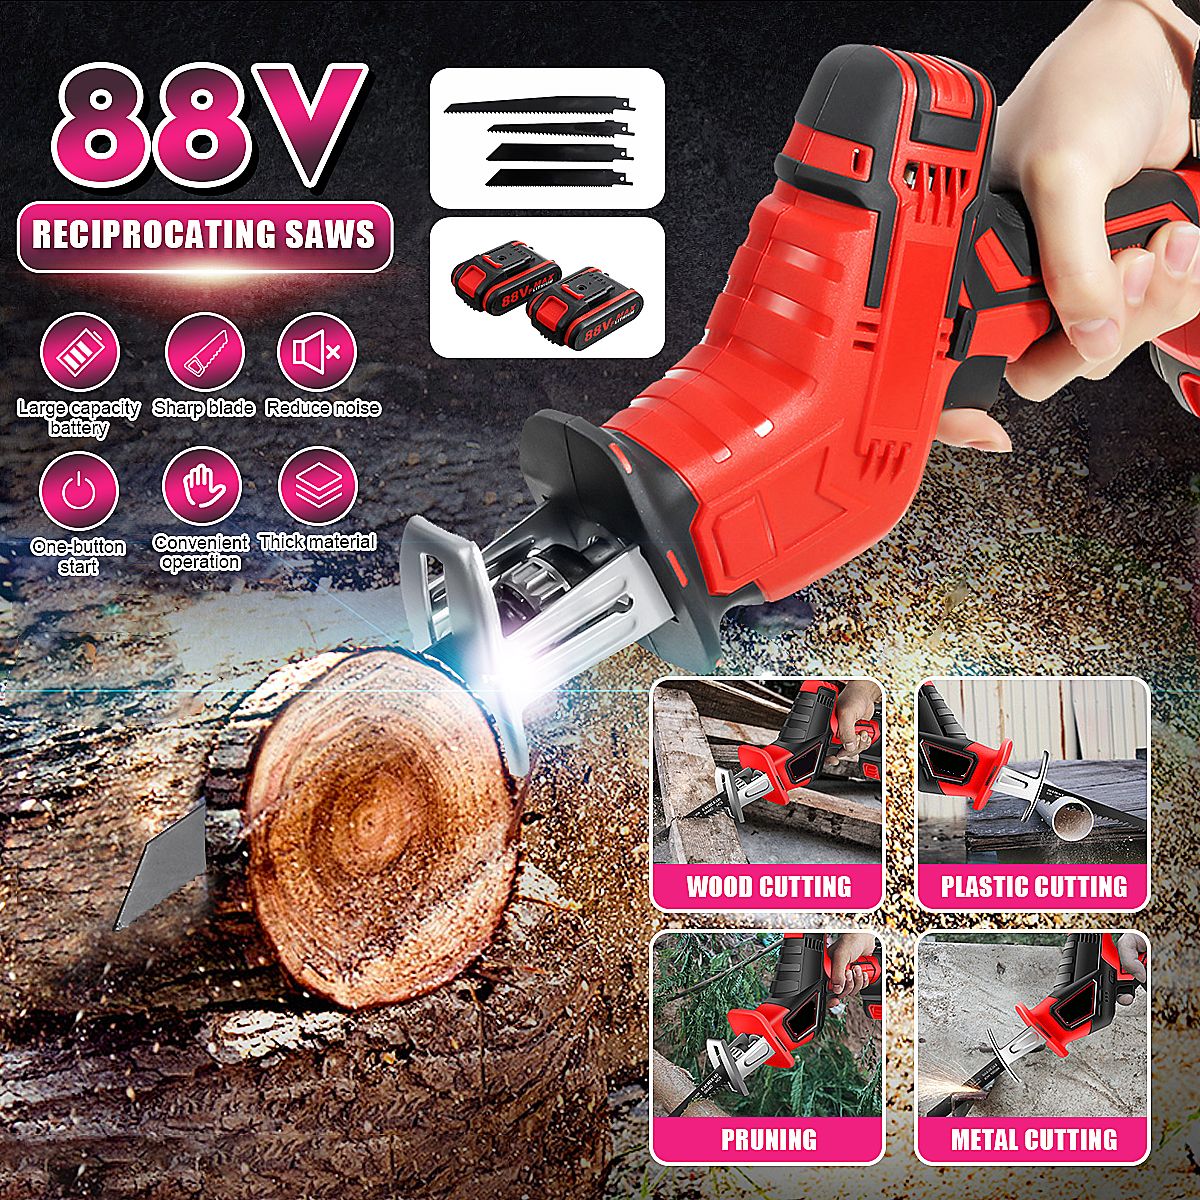 110-220V-21V-2-Lithium-Battery-Charging-Reciprocating-Saw-PVC-Pipes-Wood-Metal-Cutter-1667856